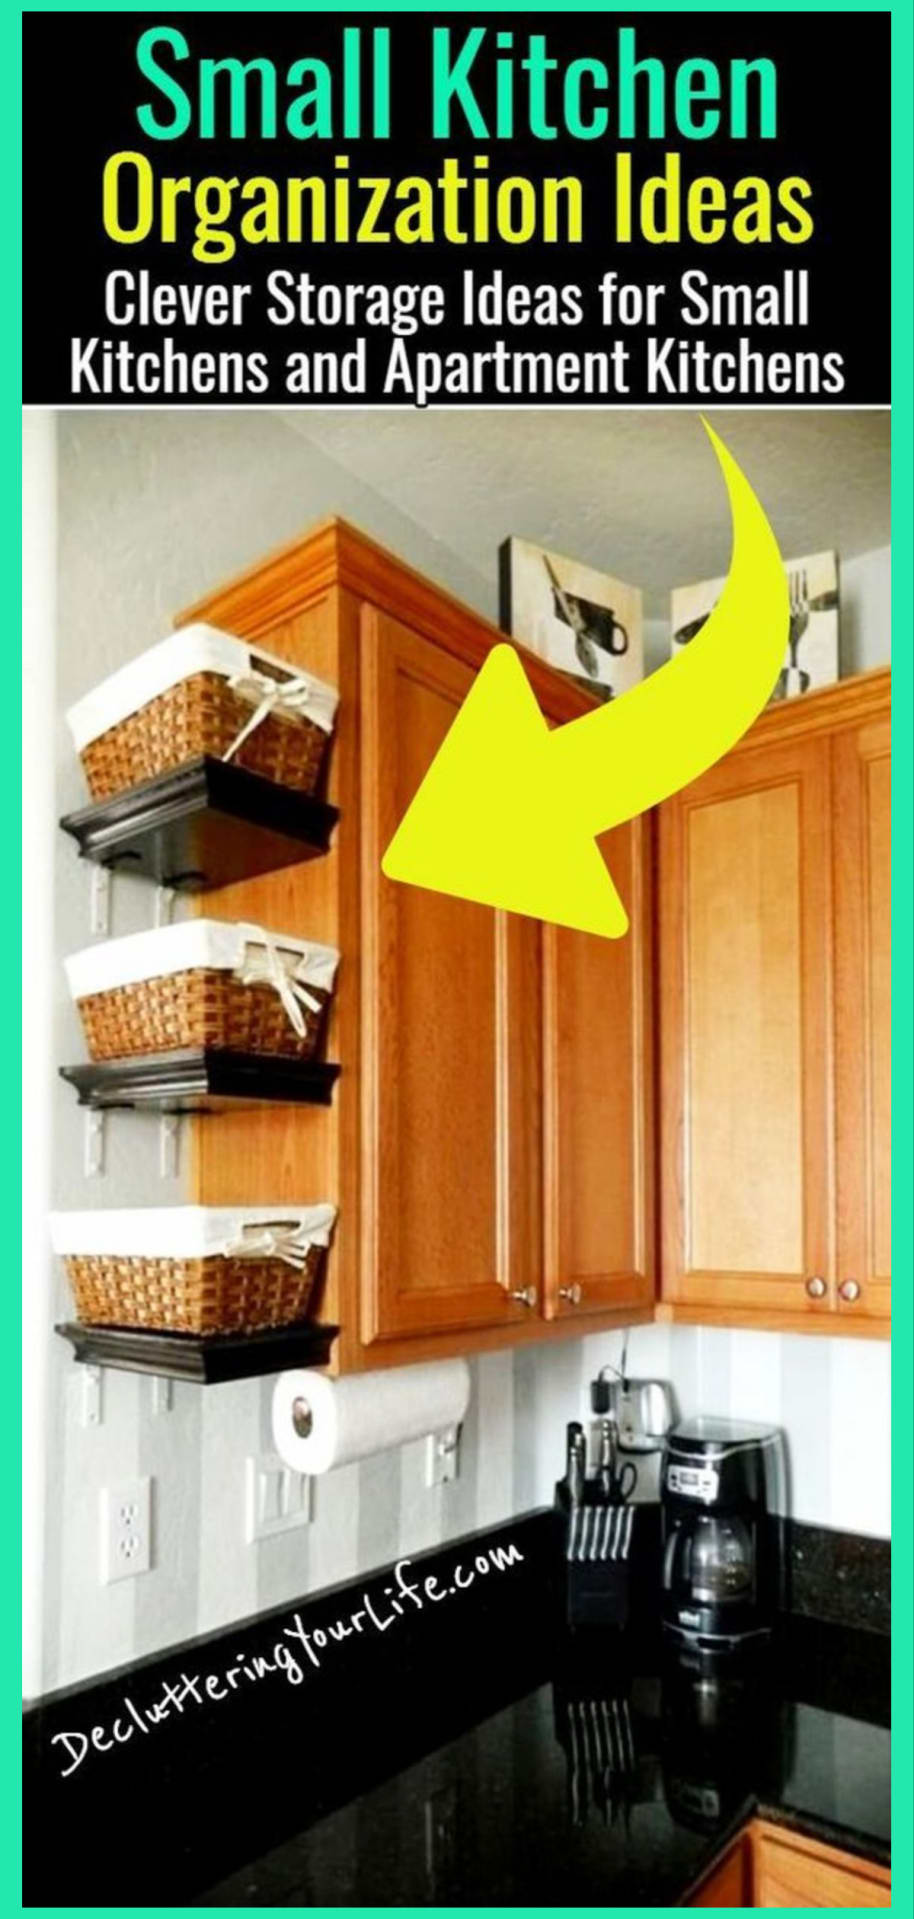 Small kitchen storage ideas for organizing tiny spaces with Dollar Stores organizers and baskets in a small kitchen - Kitchen organization open shelving life changing apartment living organization ideas for the home